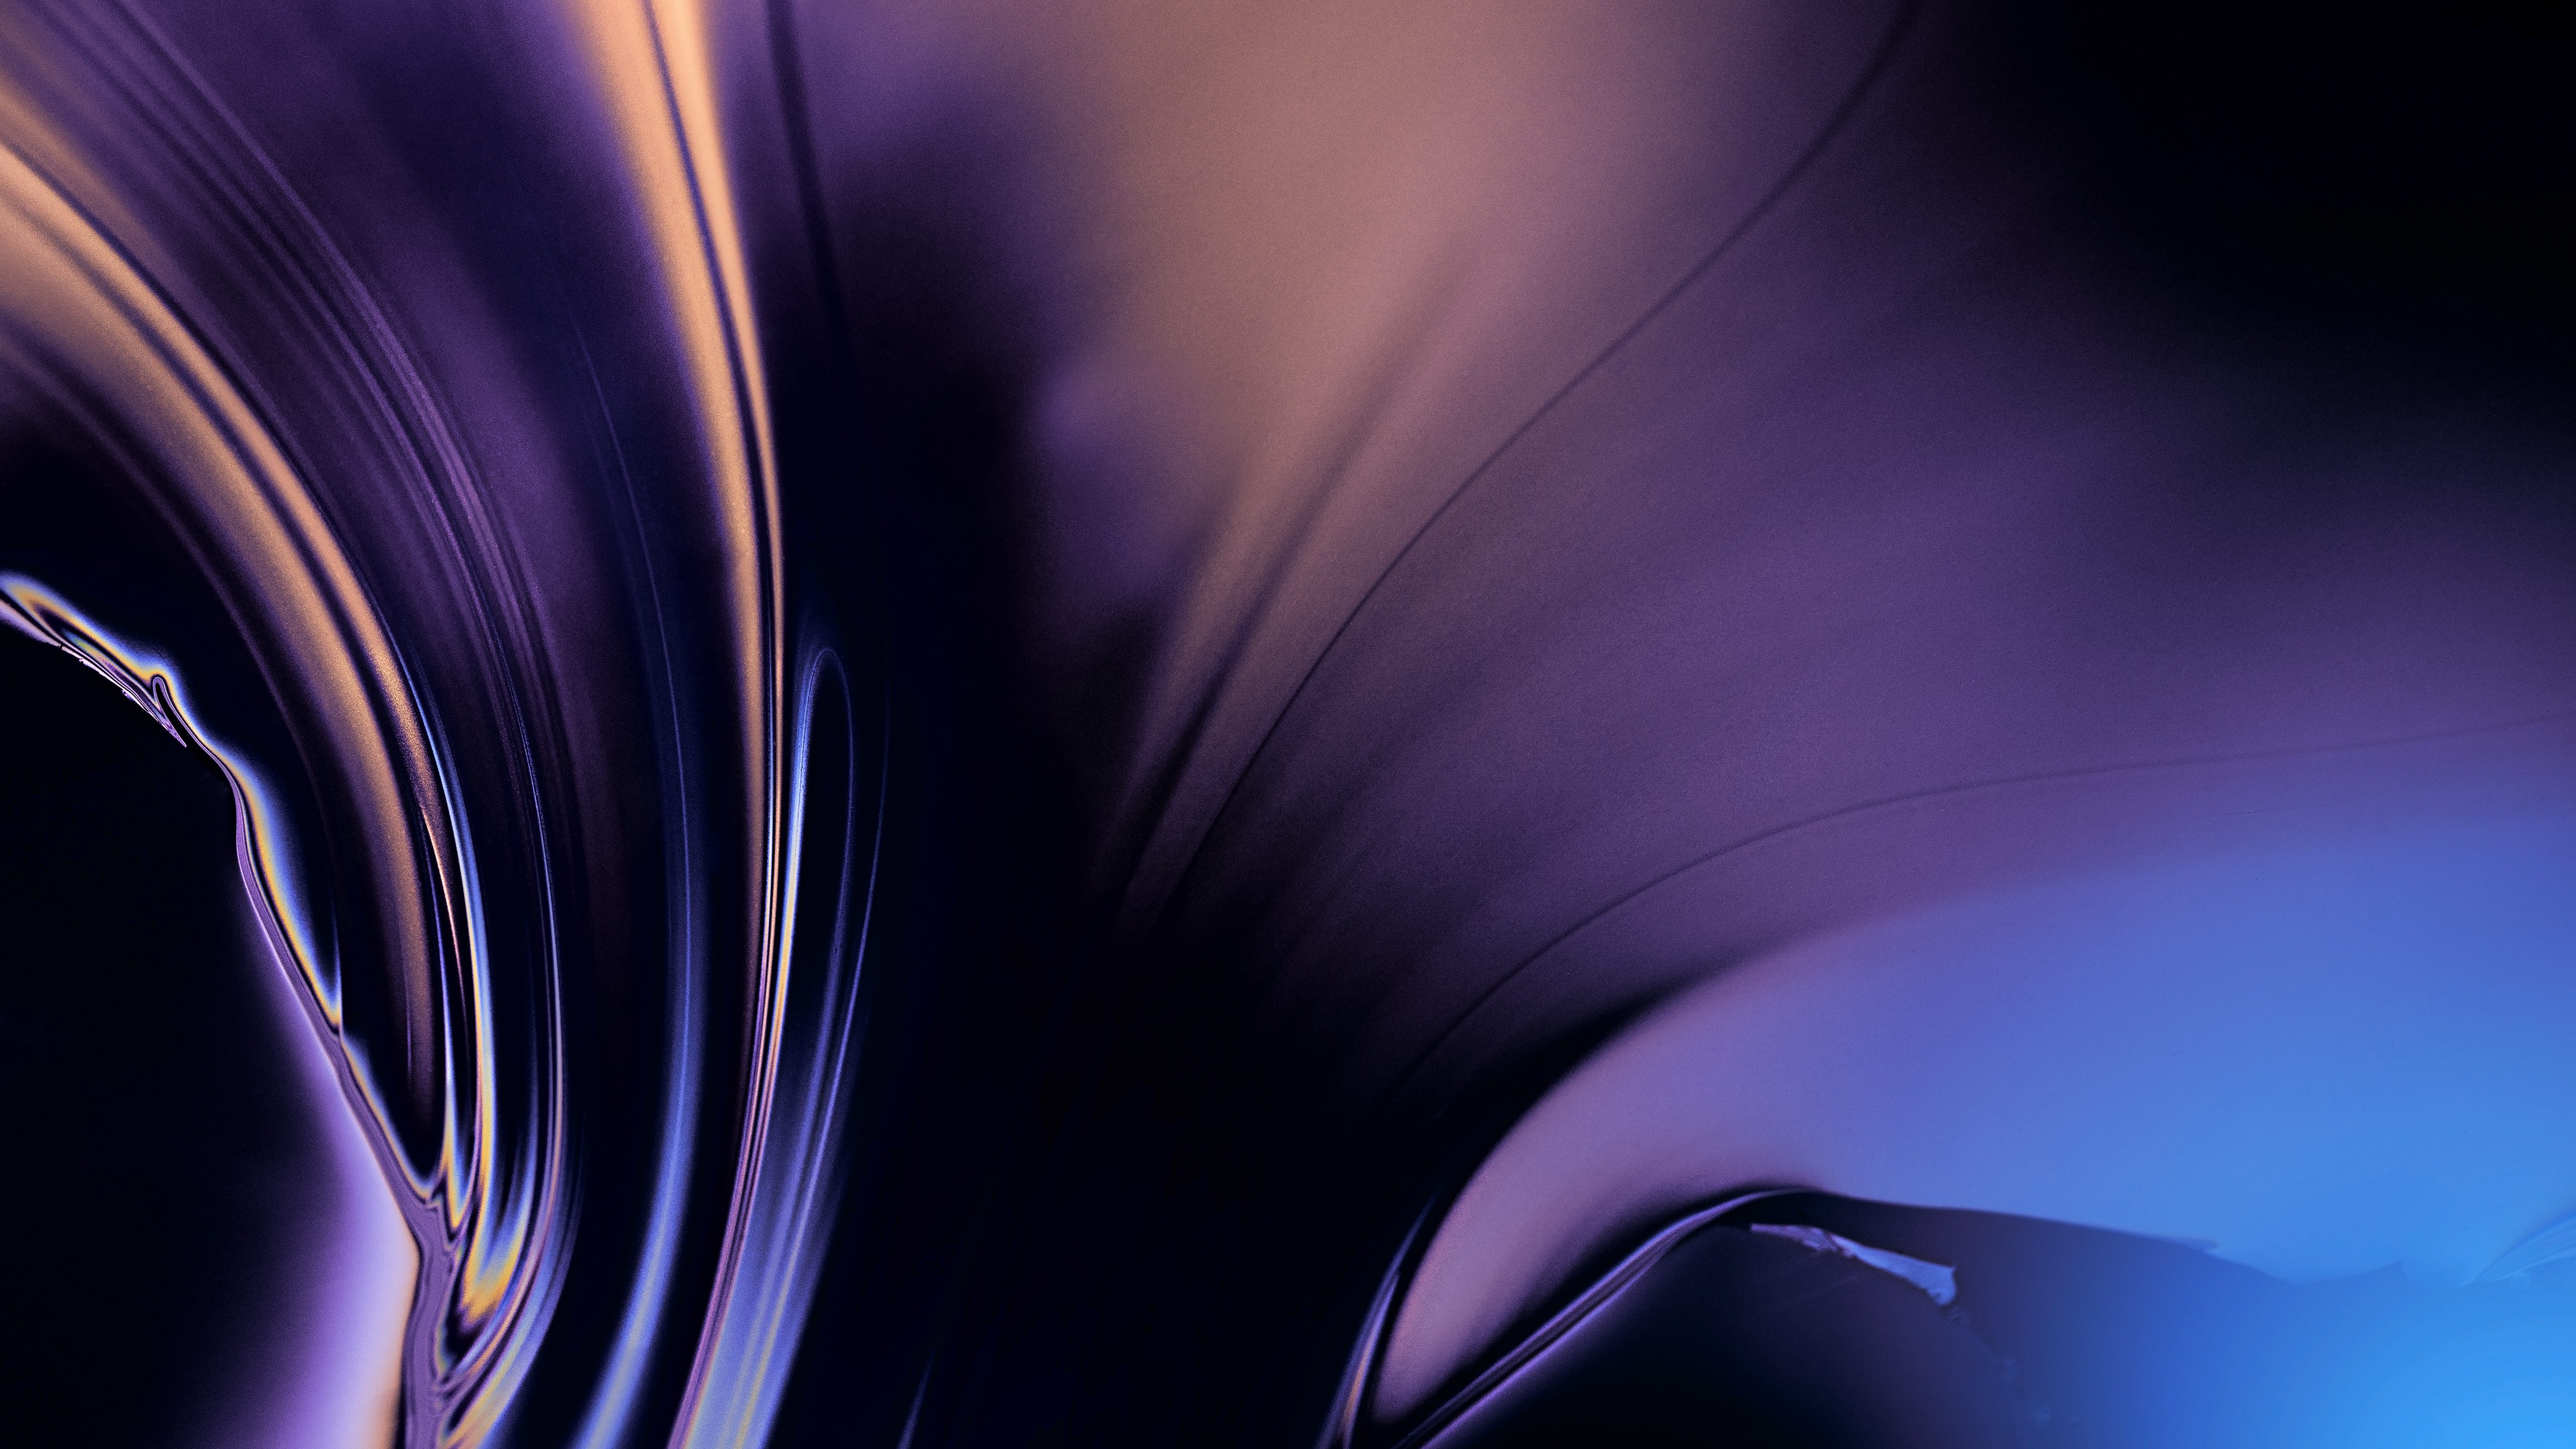 Imac Pro Abstract Wallpapers Wallpaper Cave